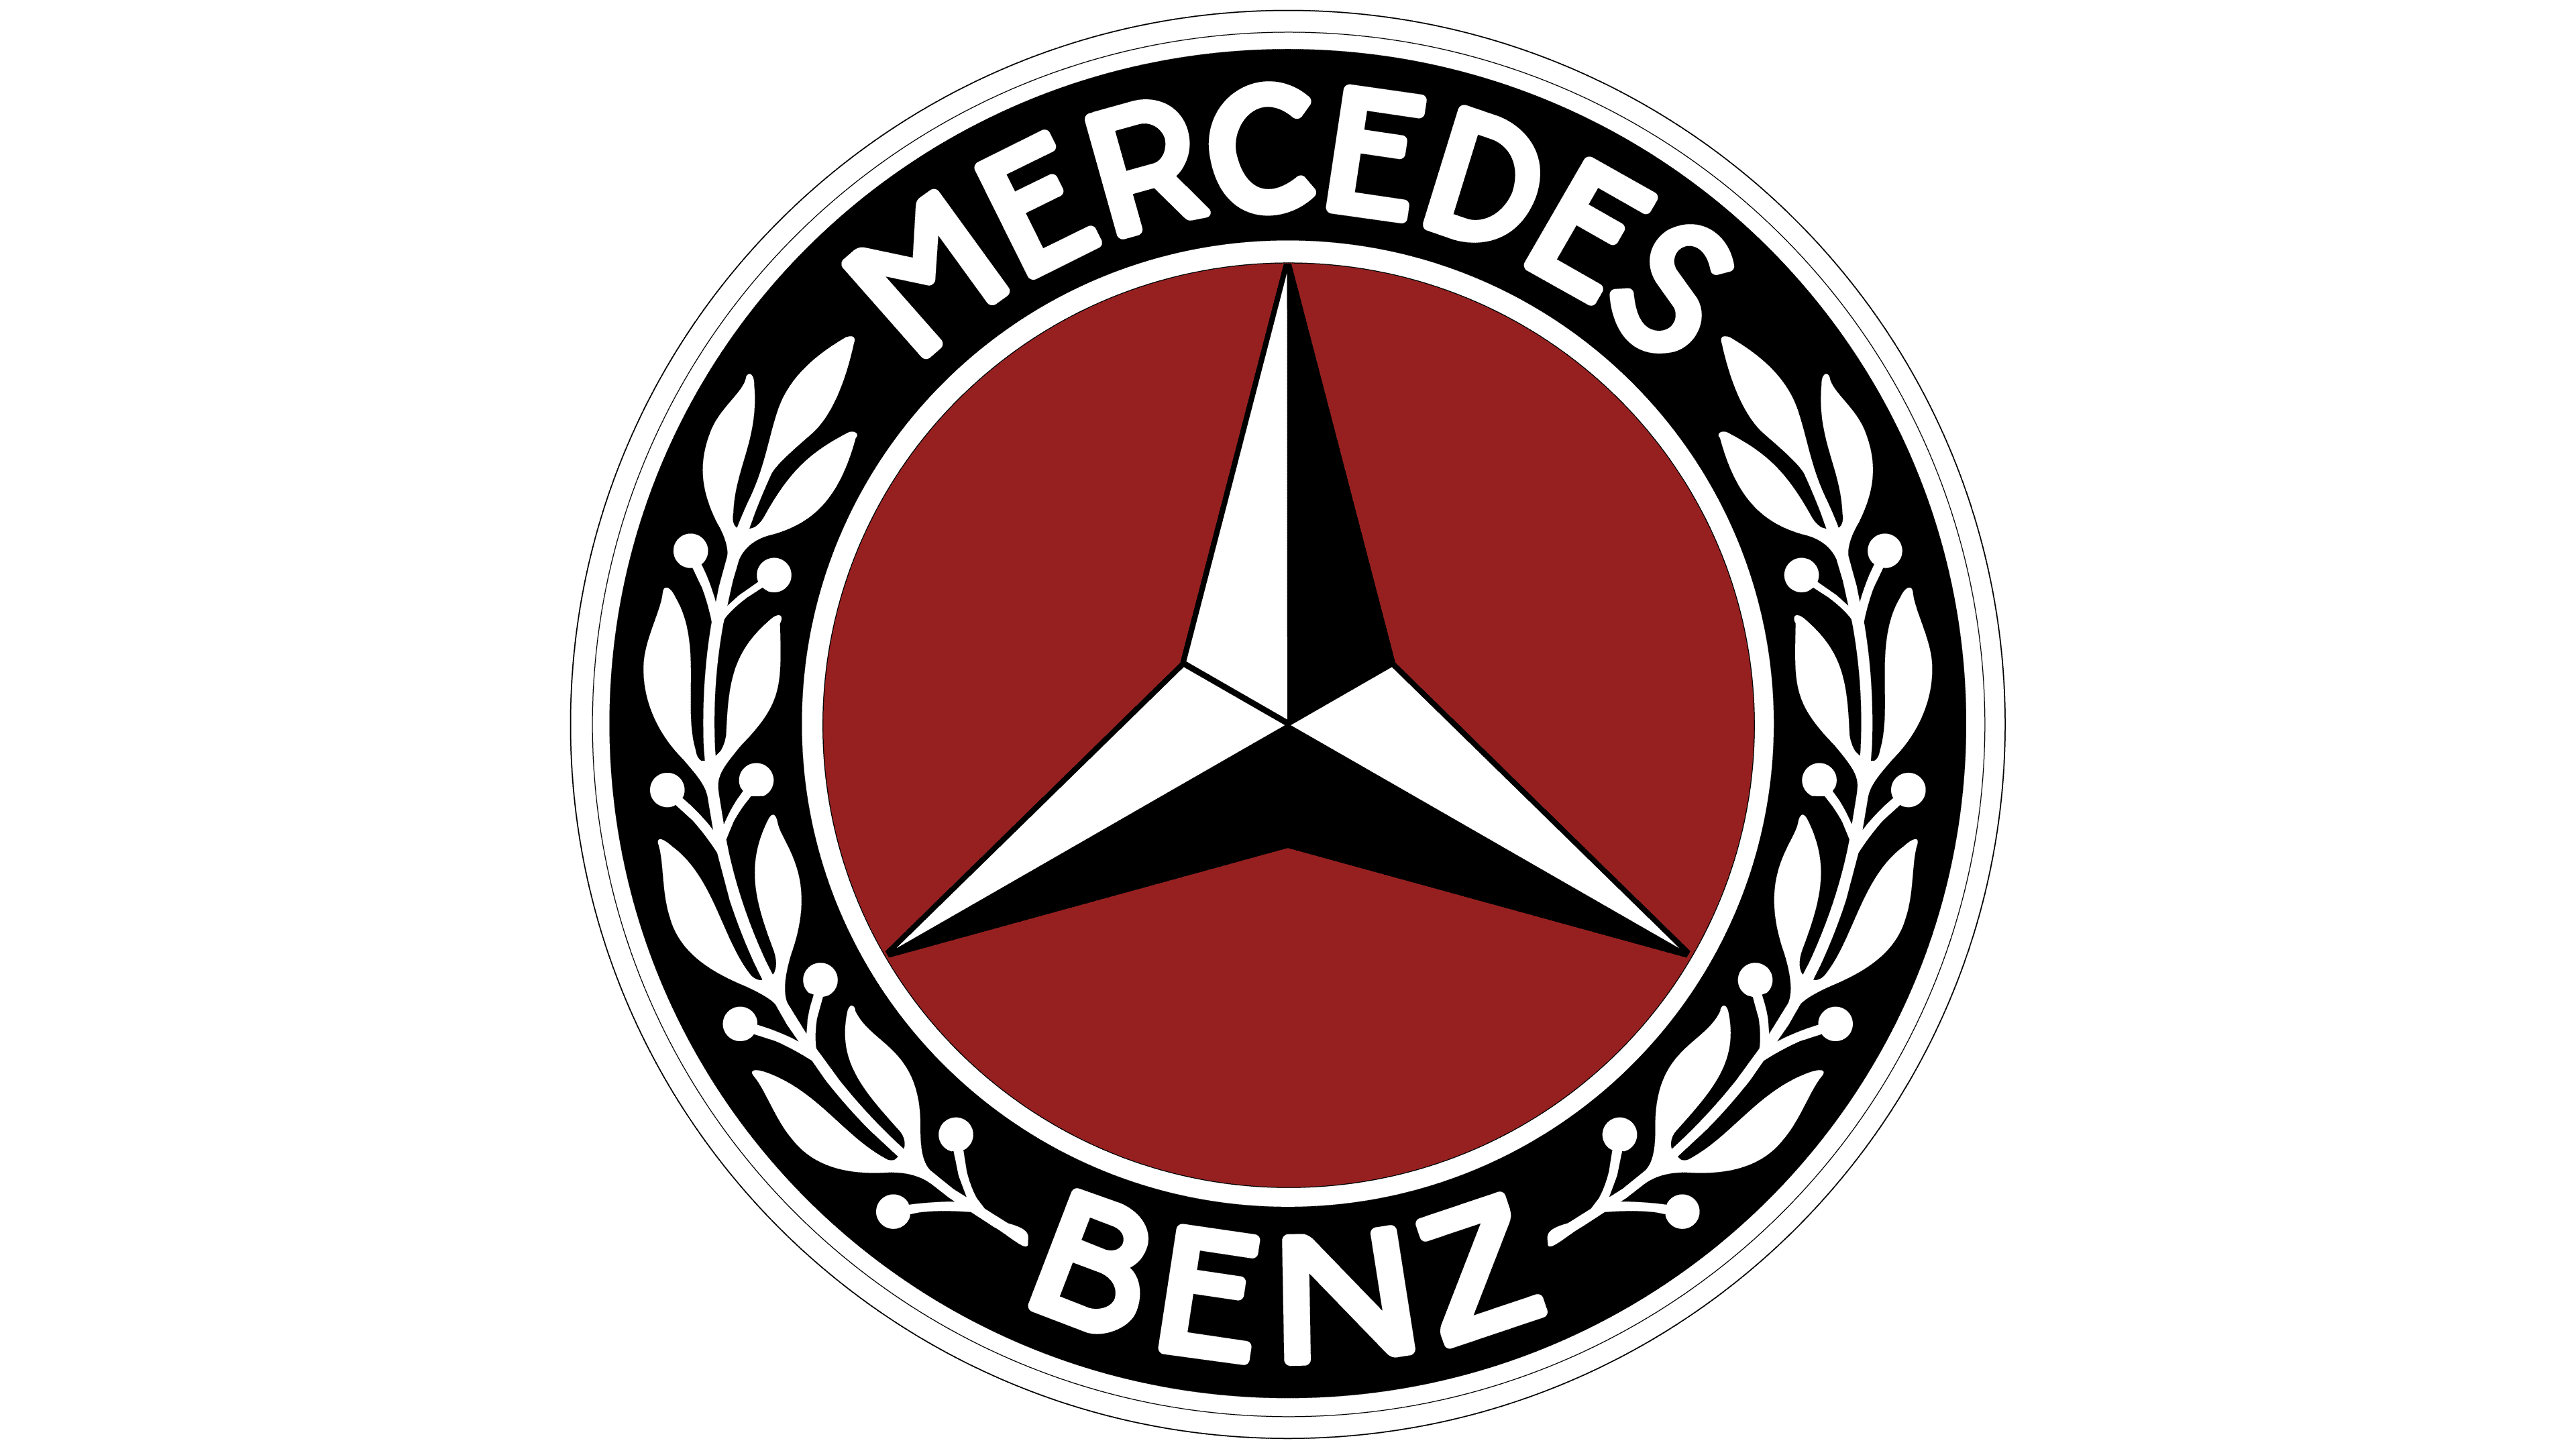 Mercedes Benz Logo and symbol, meaning, history, sign.